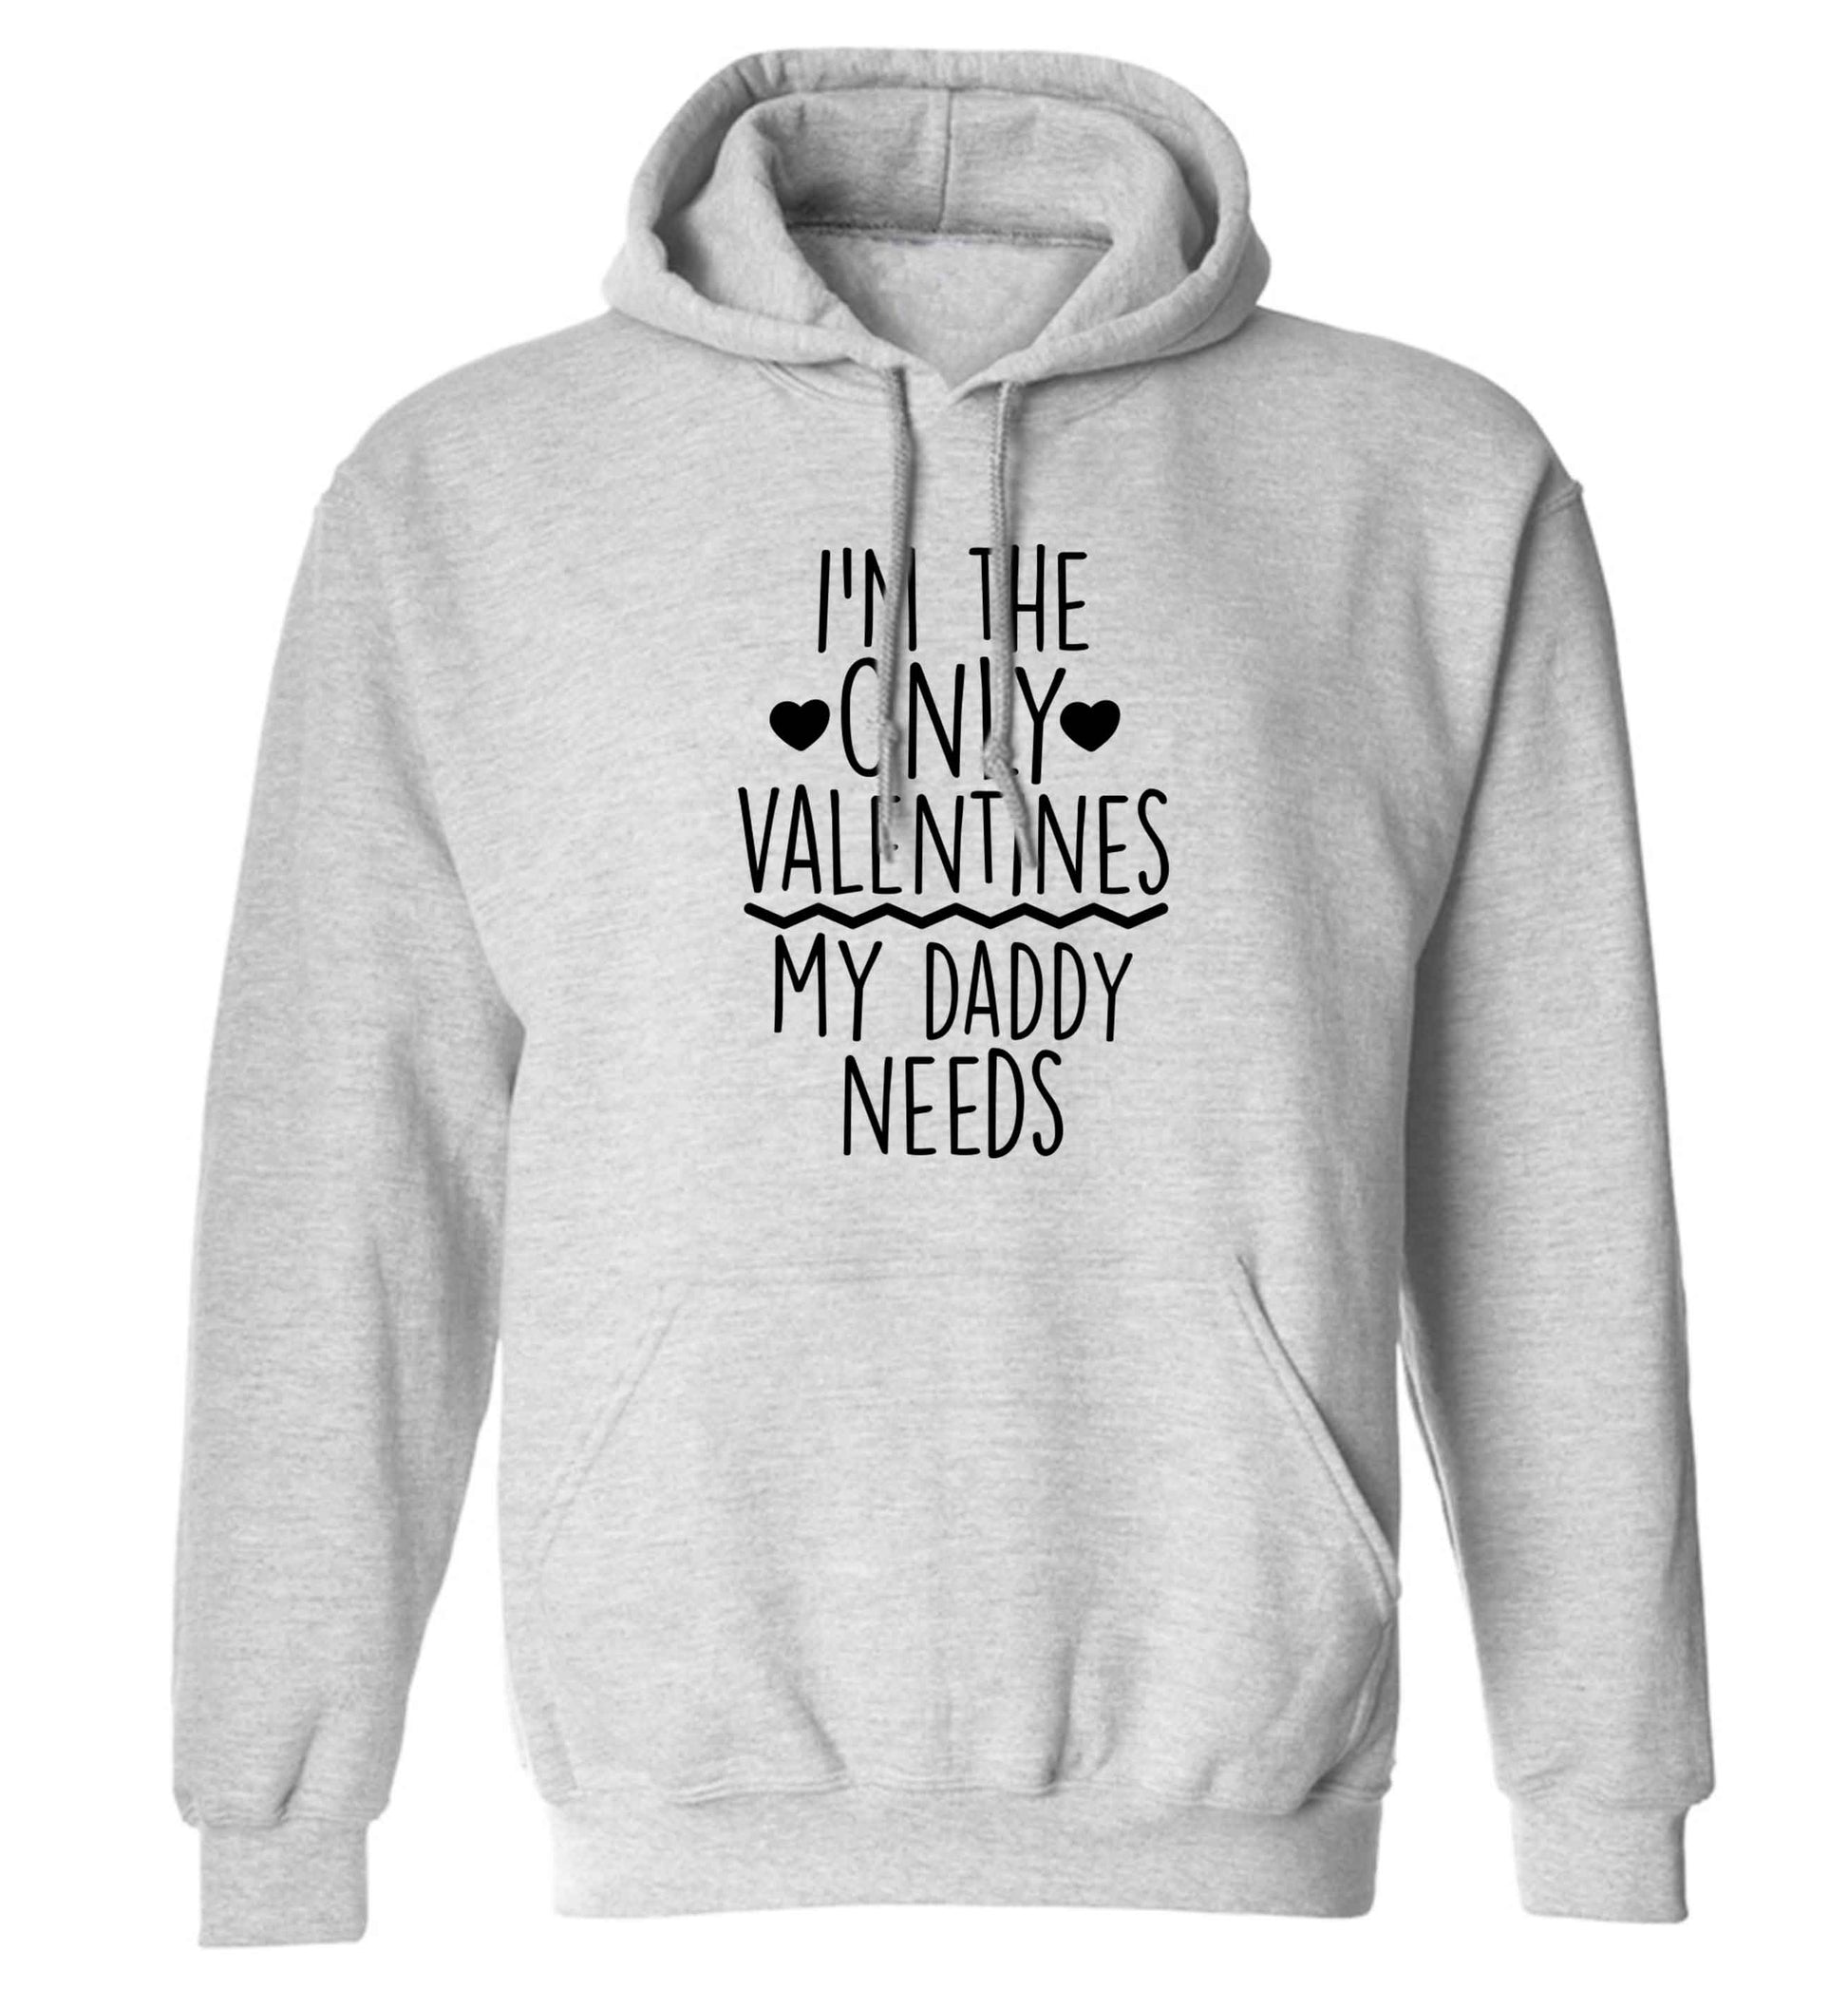 I'm the only valentines my daddy needs adults unisex grey hoodie 2XL